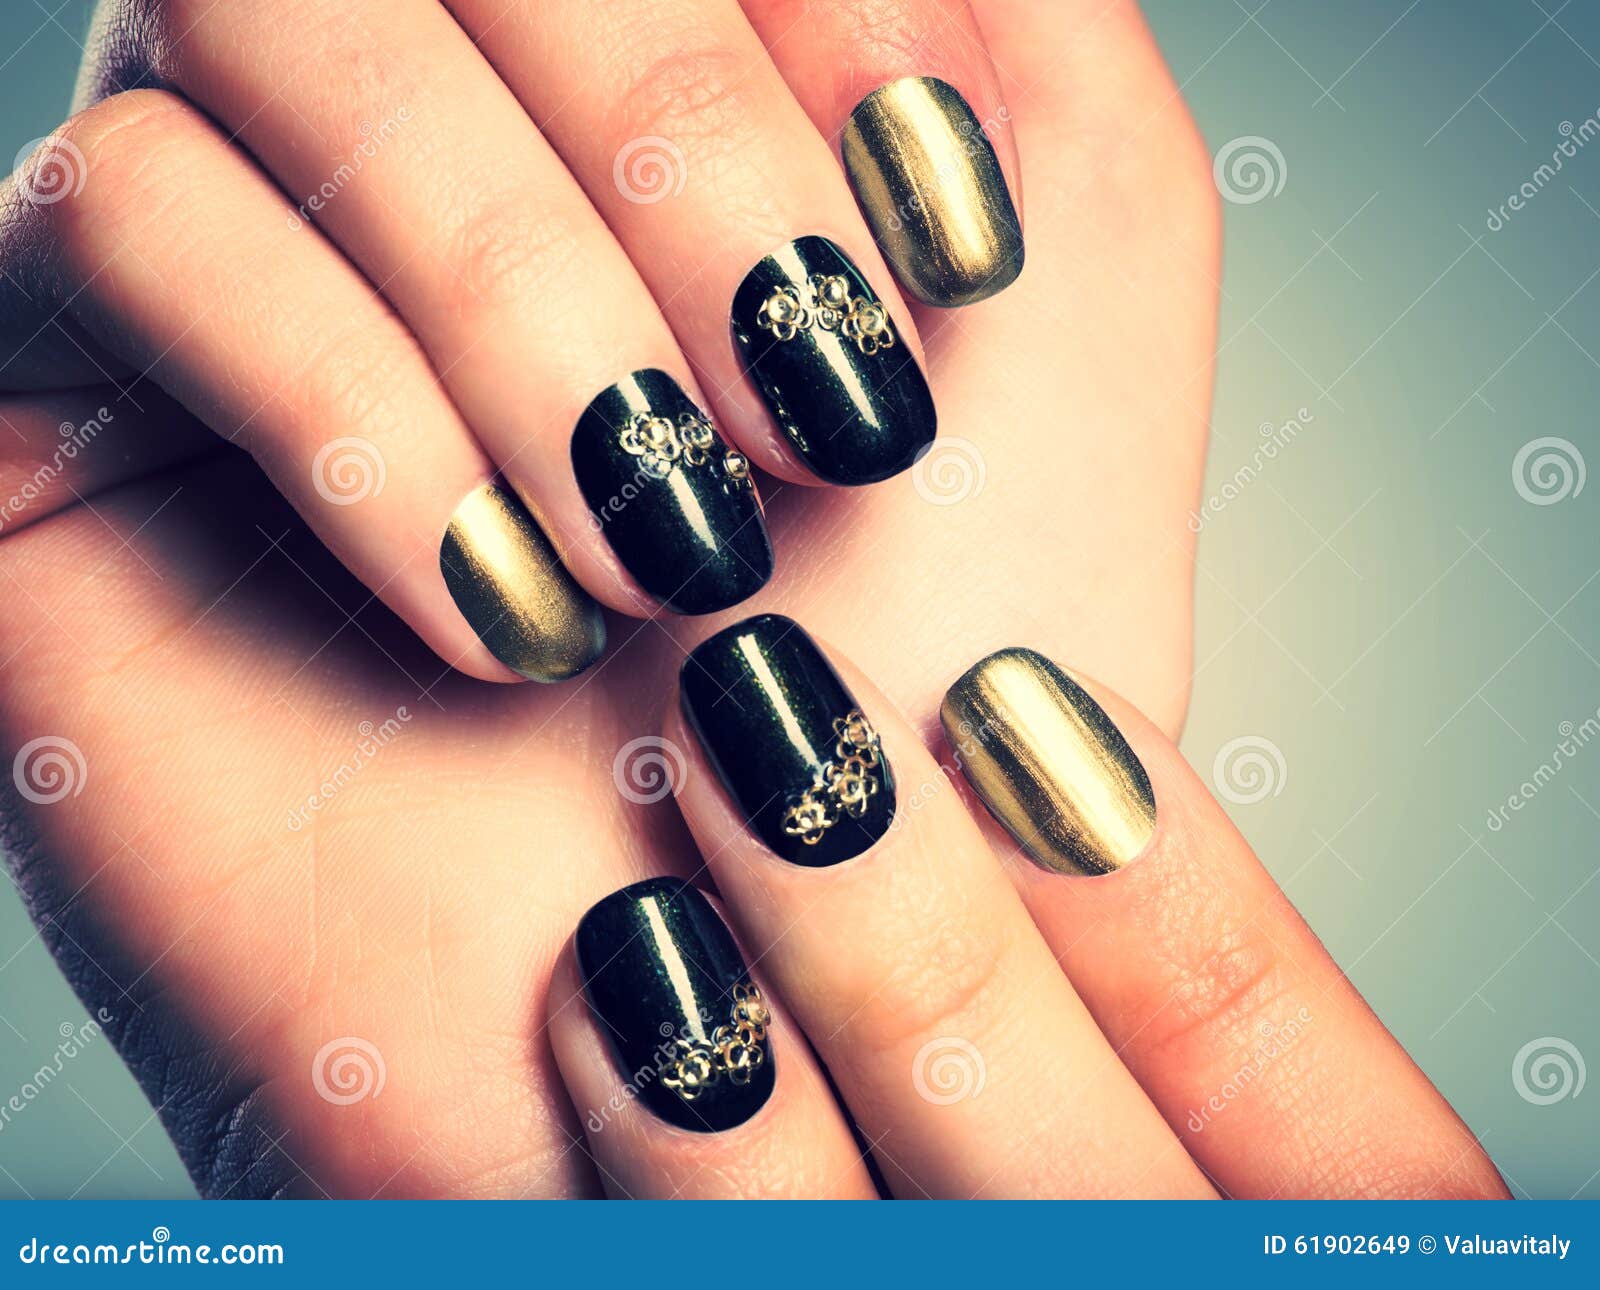 Beautiful Woman S Nails with Creative Manicure Stock Image - Image of ...